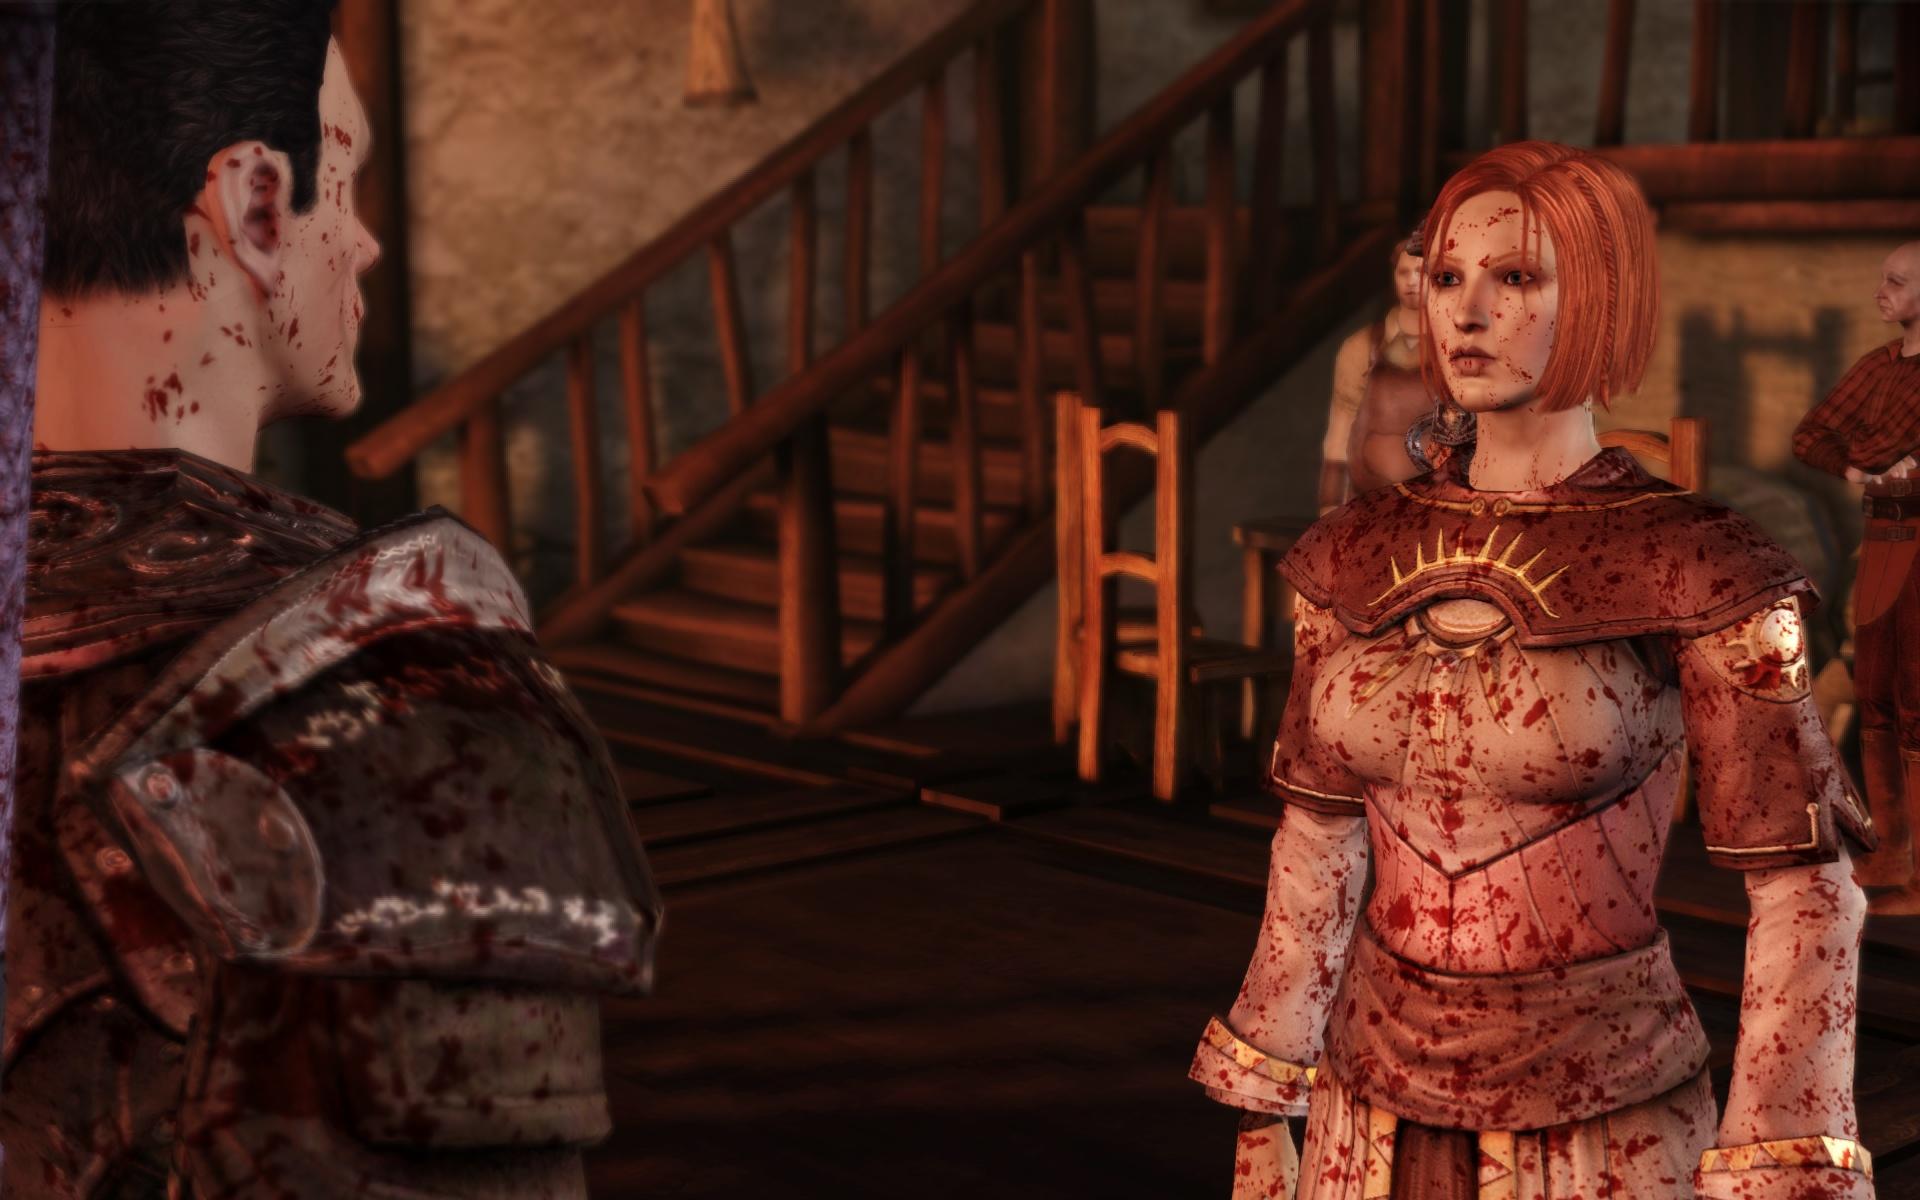 Dragon Age Origins grey warden speaks to a bloodstained girl